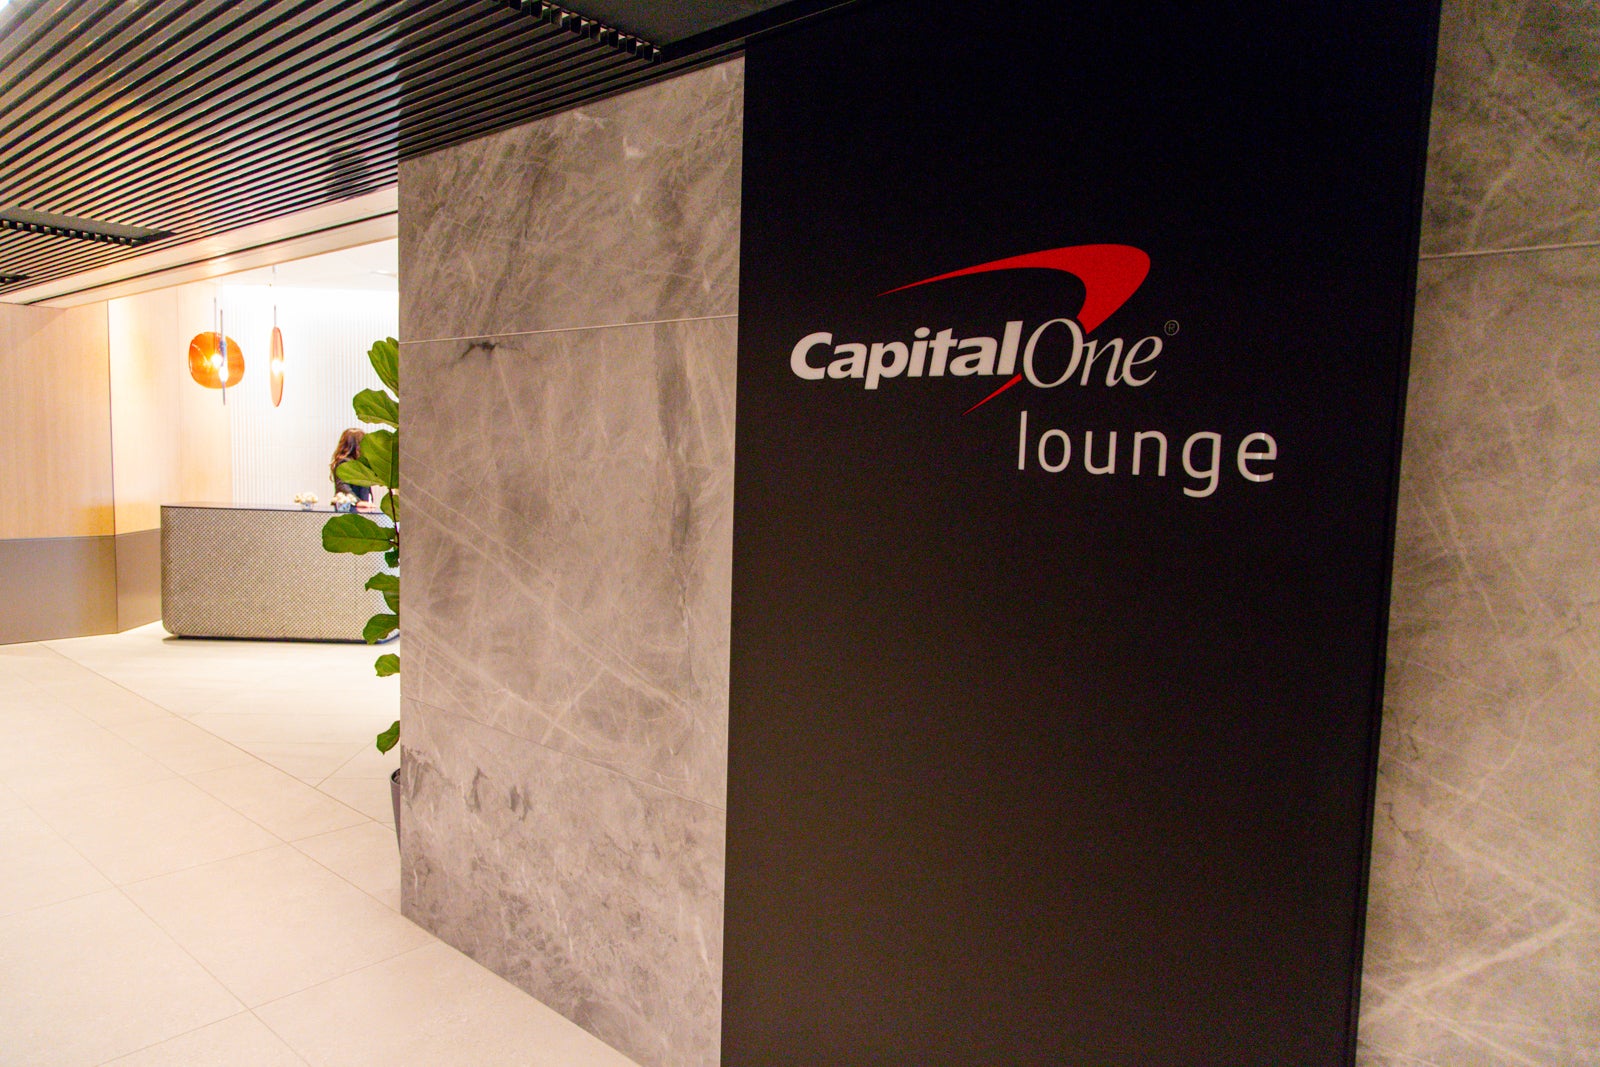 Photo shows signage leading to a Capital One lounge further down the hall